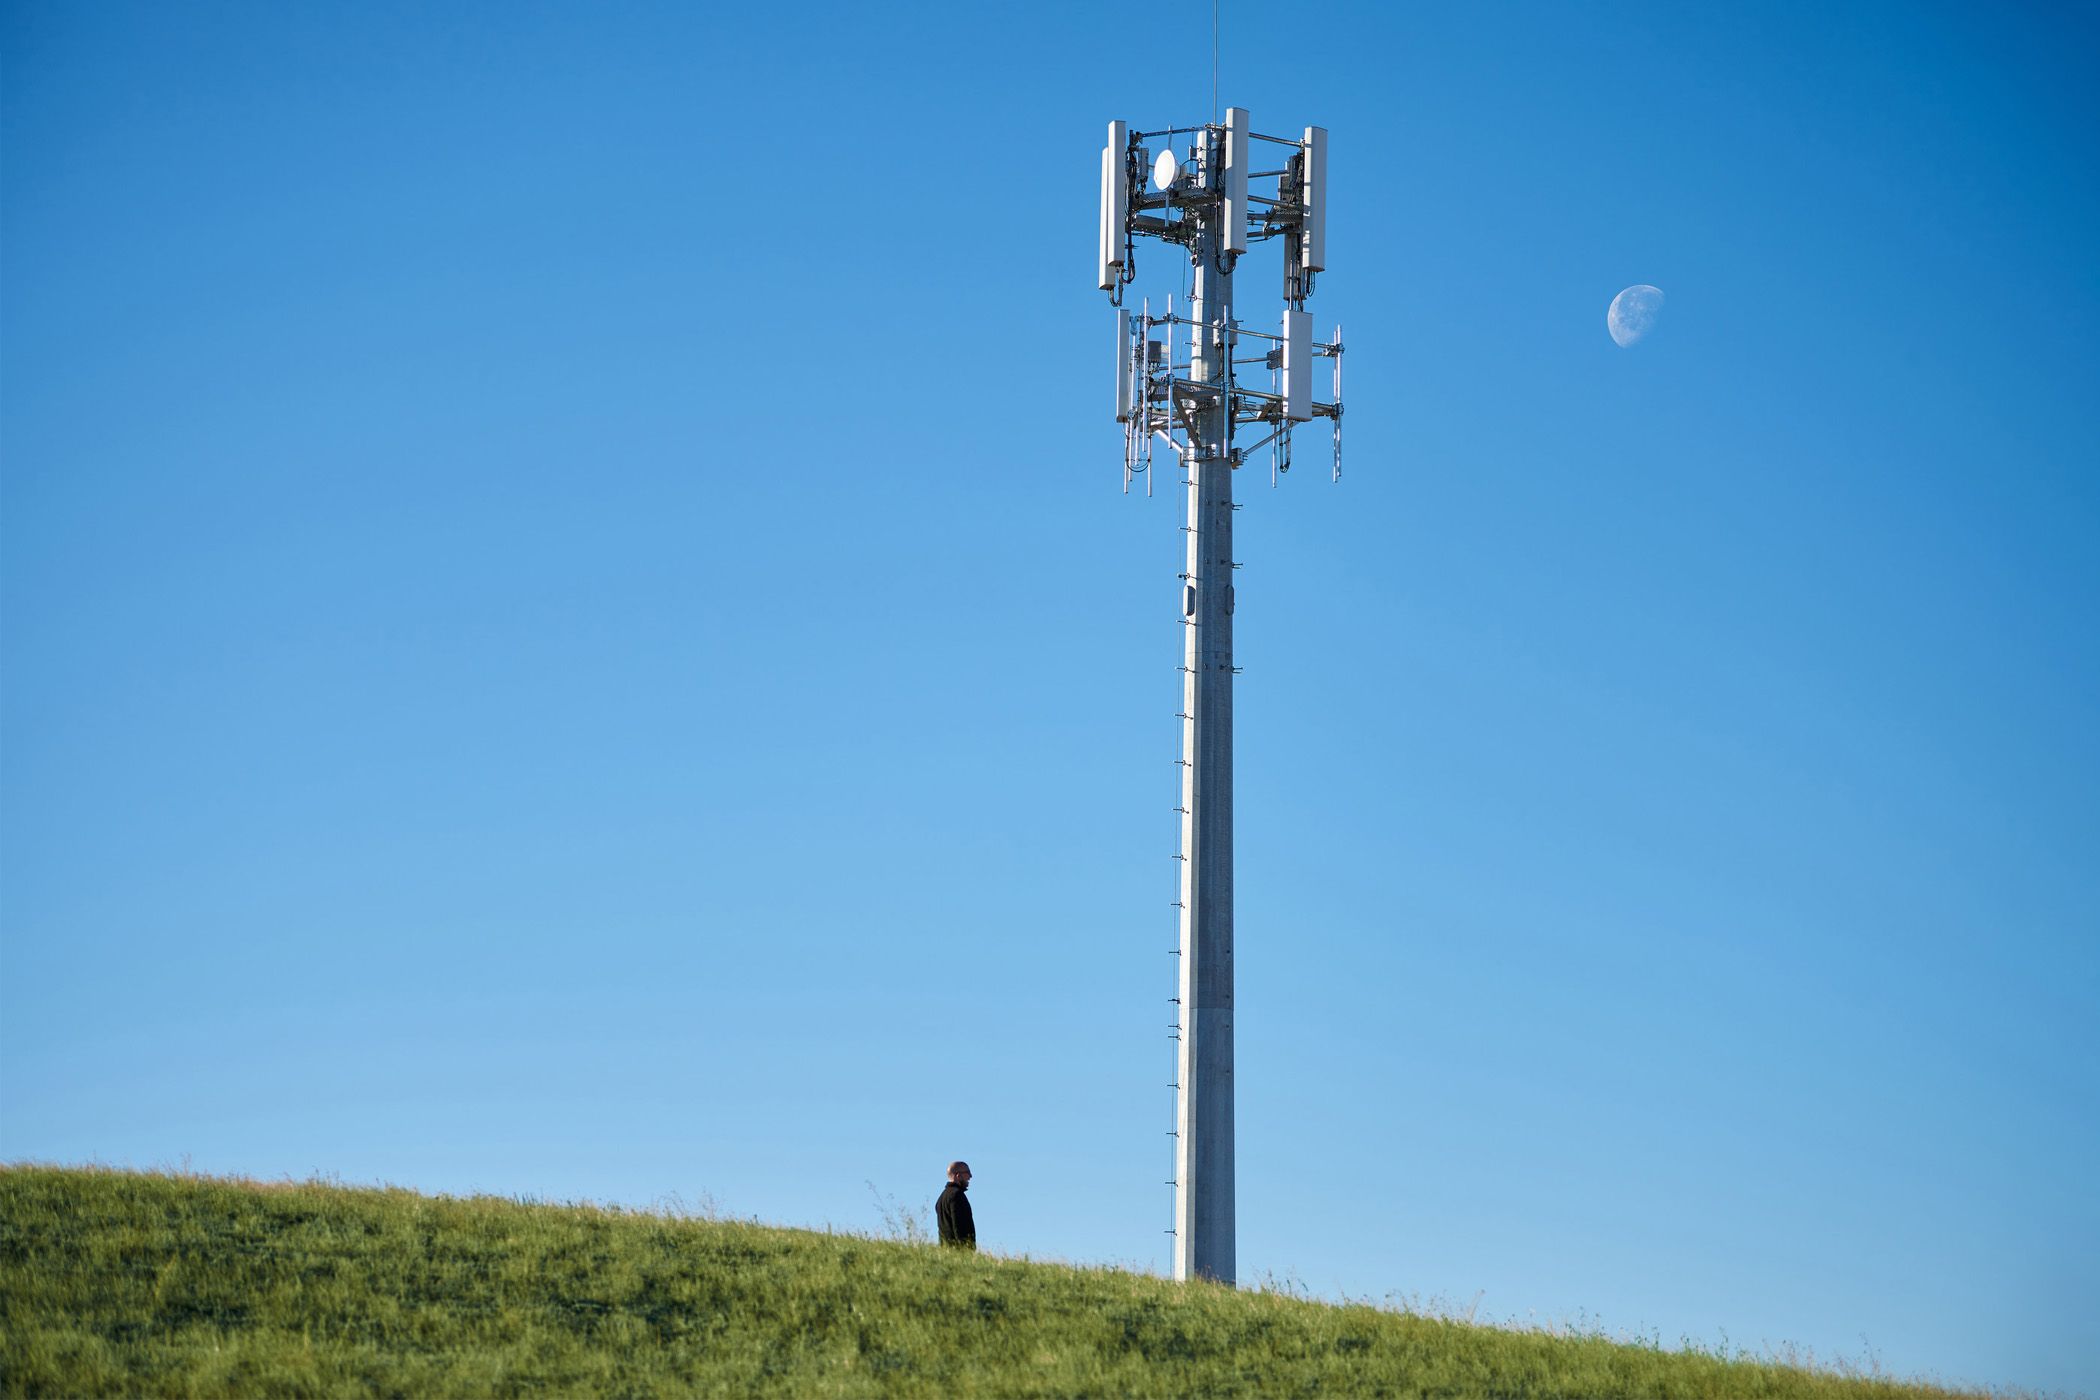 Cell tower on a hill with a person standing below and a daytime moon in the sky.